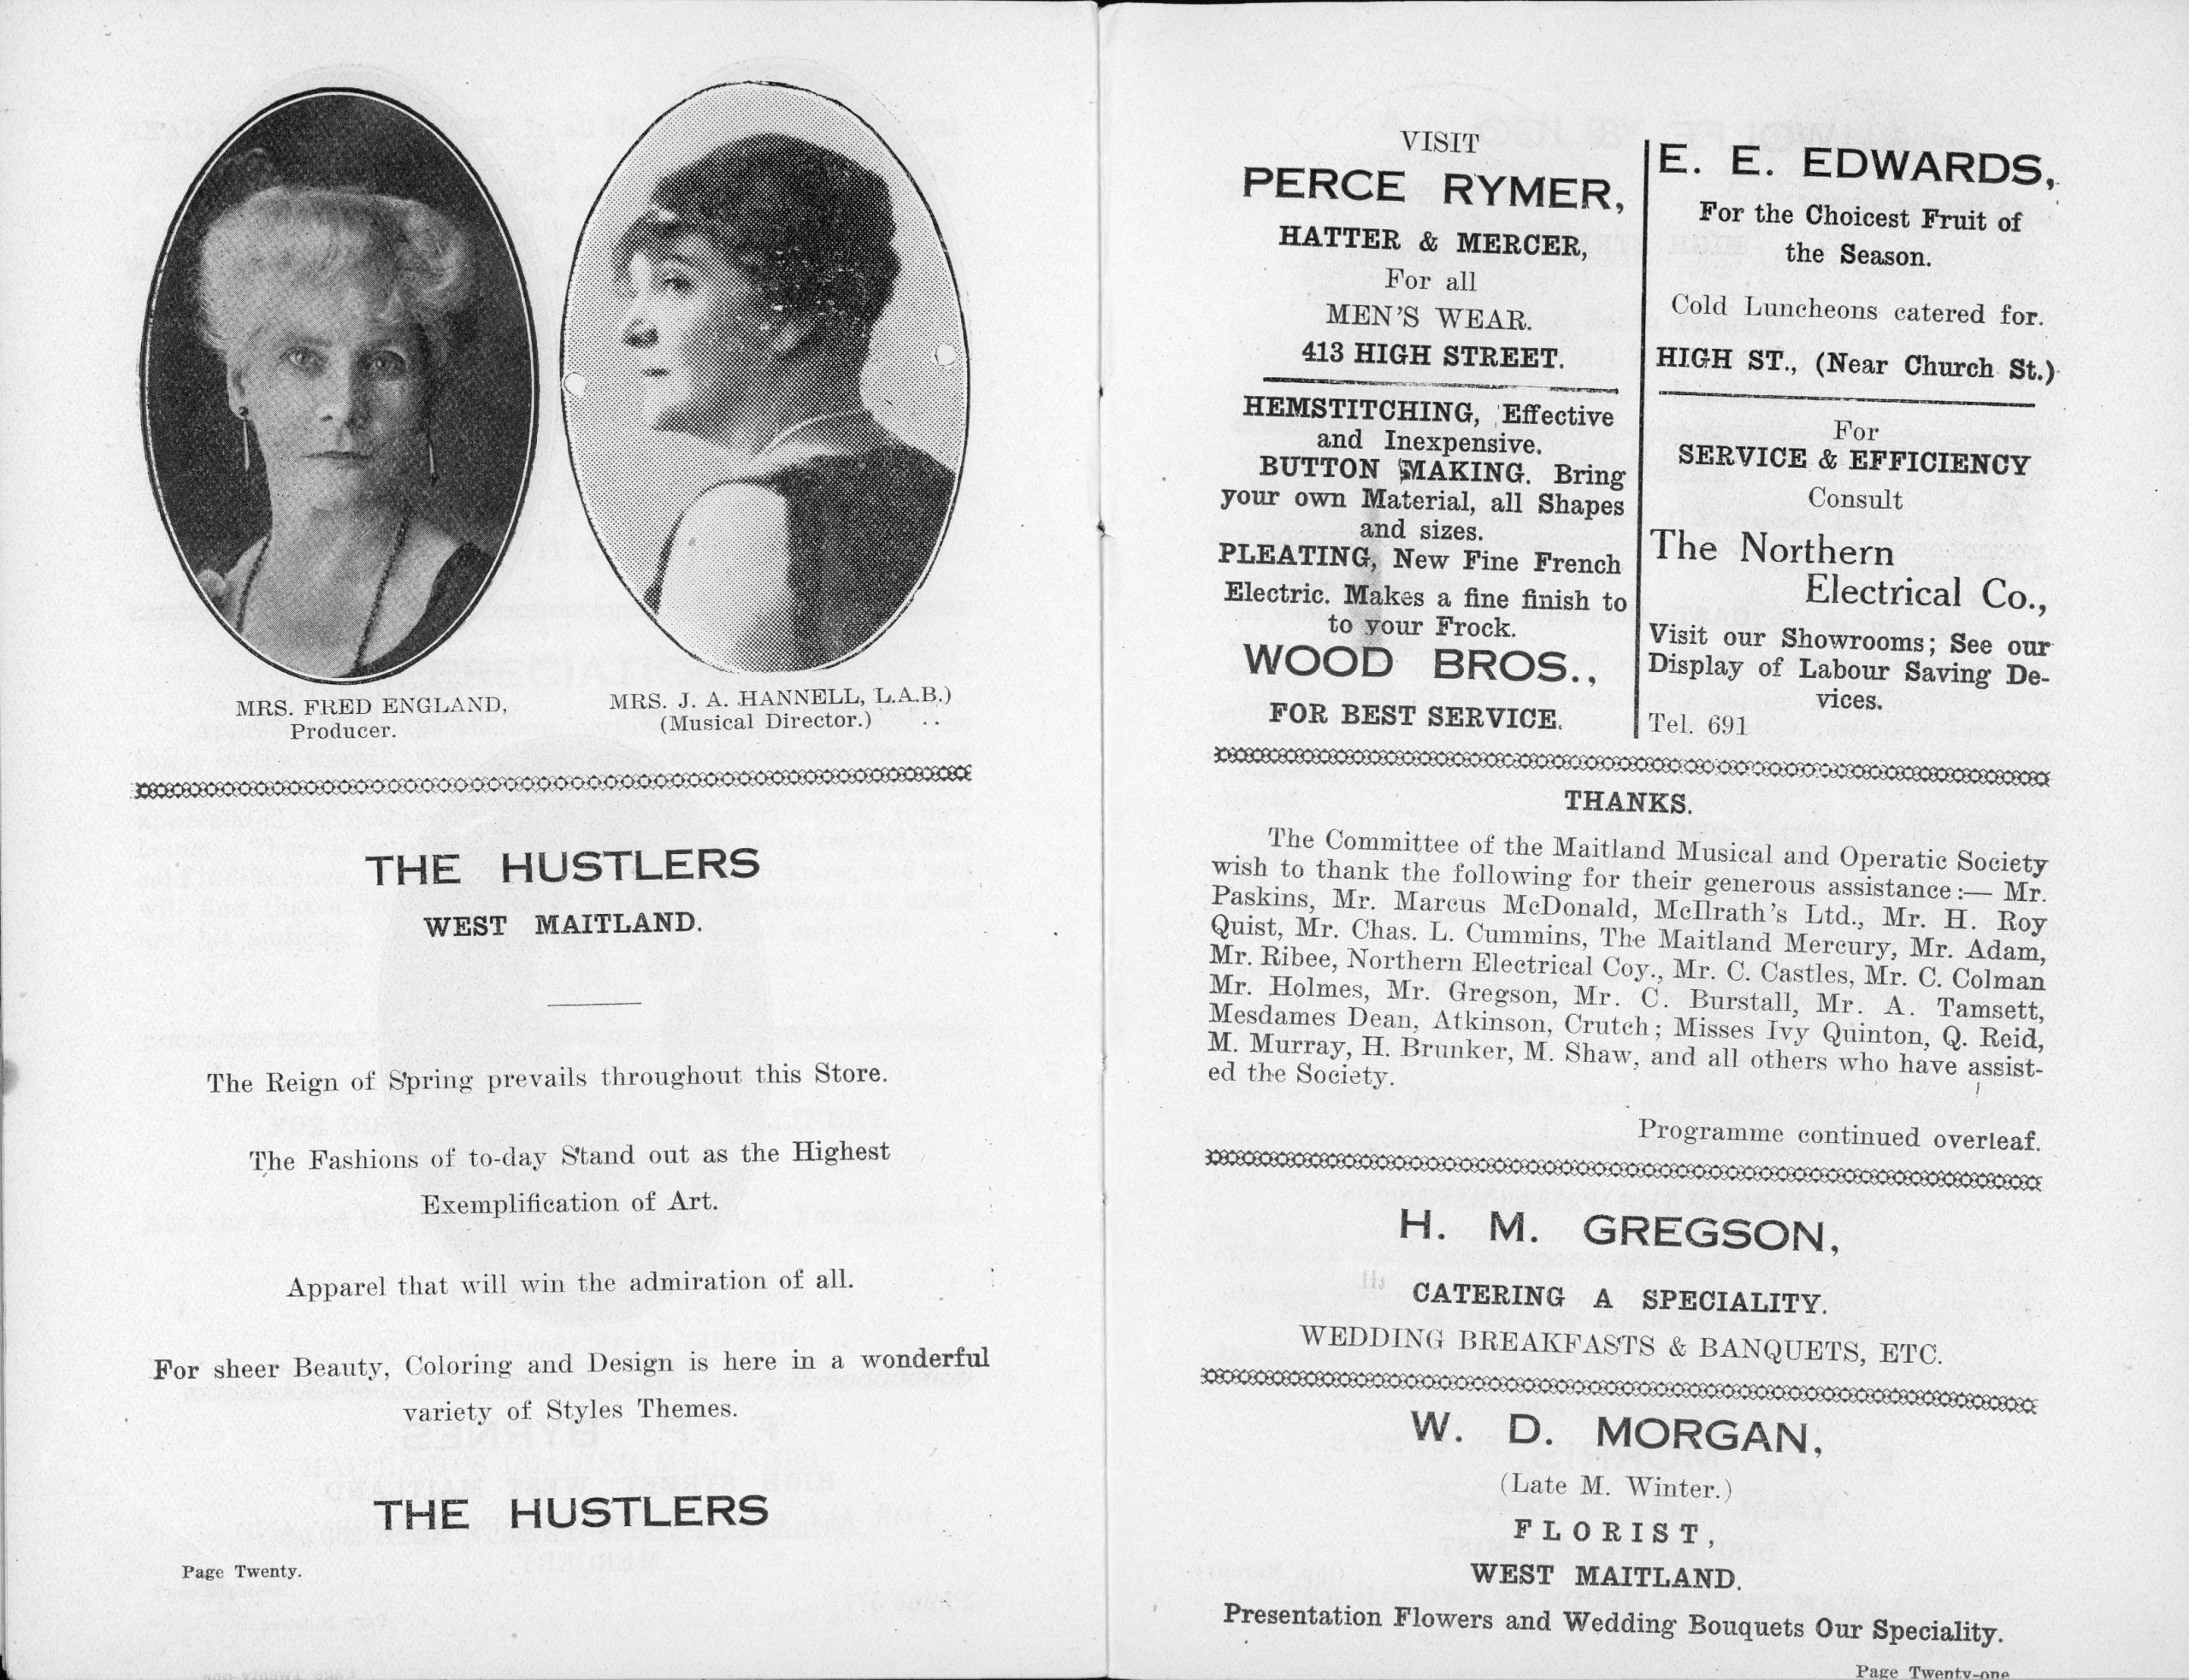 Text advertisements for various stores selling menswear, fruit, and catering. Two photographic portraits of the Producer, Mrs Fred England, and Musical Director, Mrs J.A. Hannell, L.A.B., are also displayed.